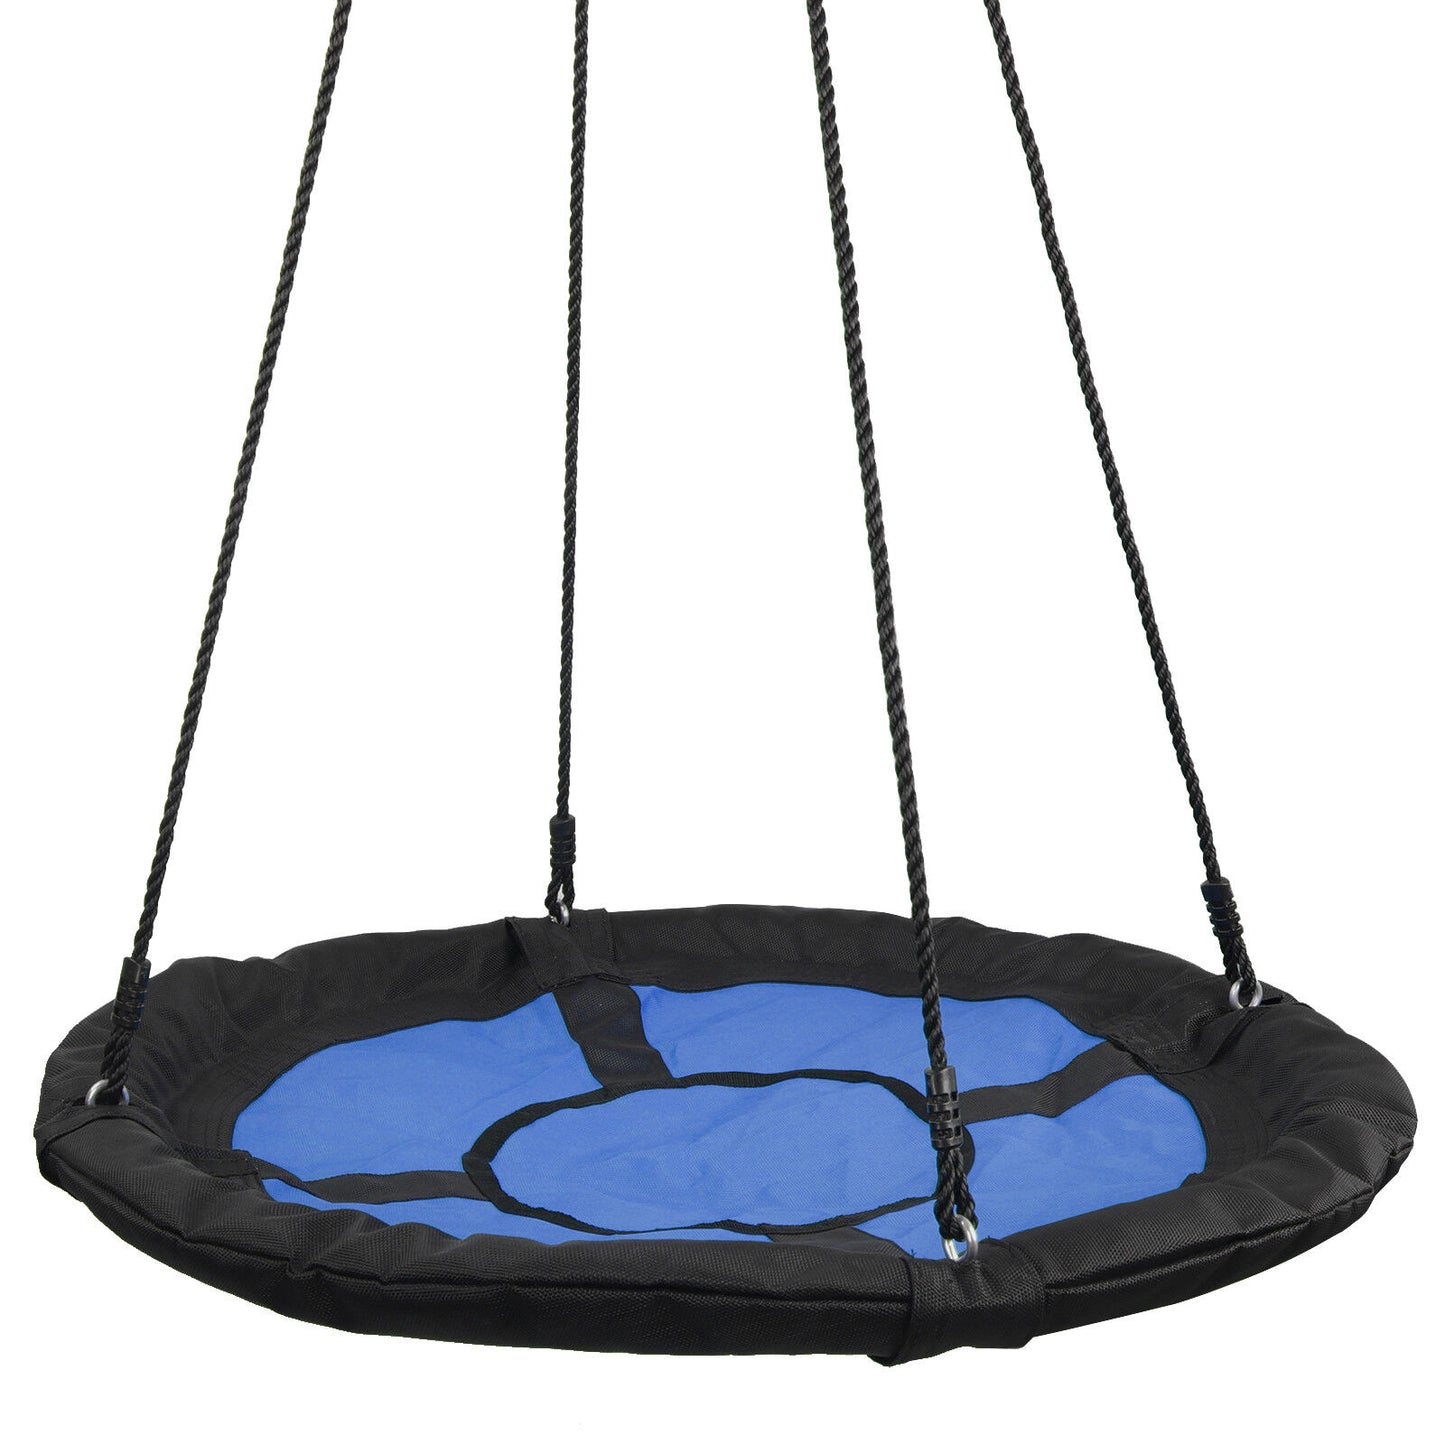 Premium Heavy Duty Porch Stand+ 40" Large Kids Saucer Tree Swing Safe PE Rope